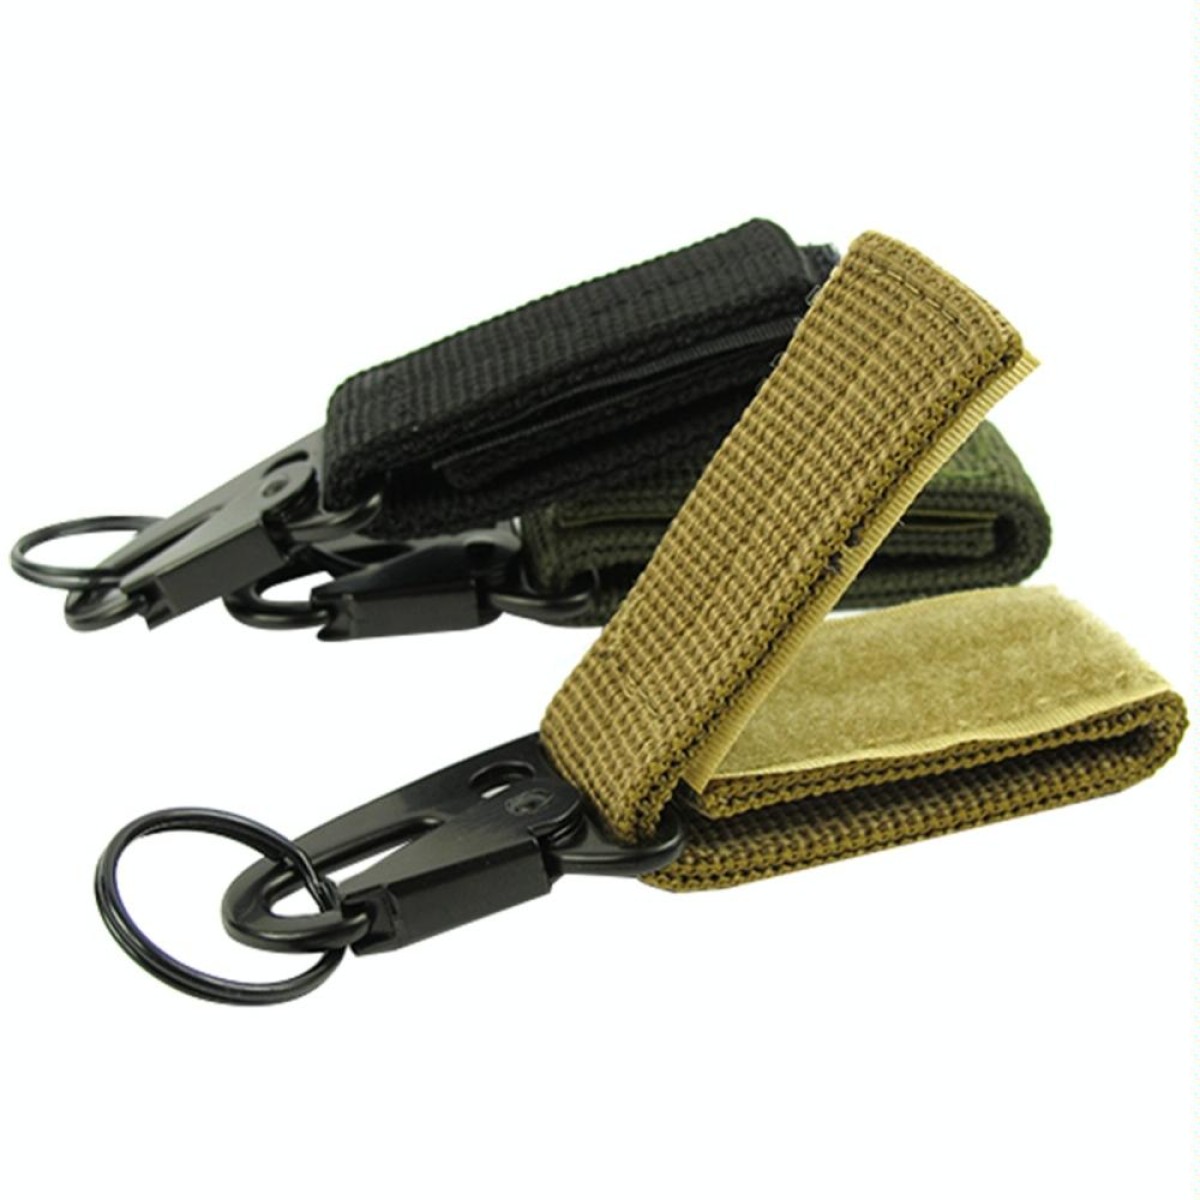 2PCS Outdoor Camping  Carabiner Backpack Hooks Olecranon Molle Hook Survival Gear EDC Nylon Keychain Clasp(Black)